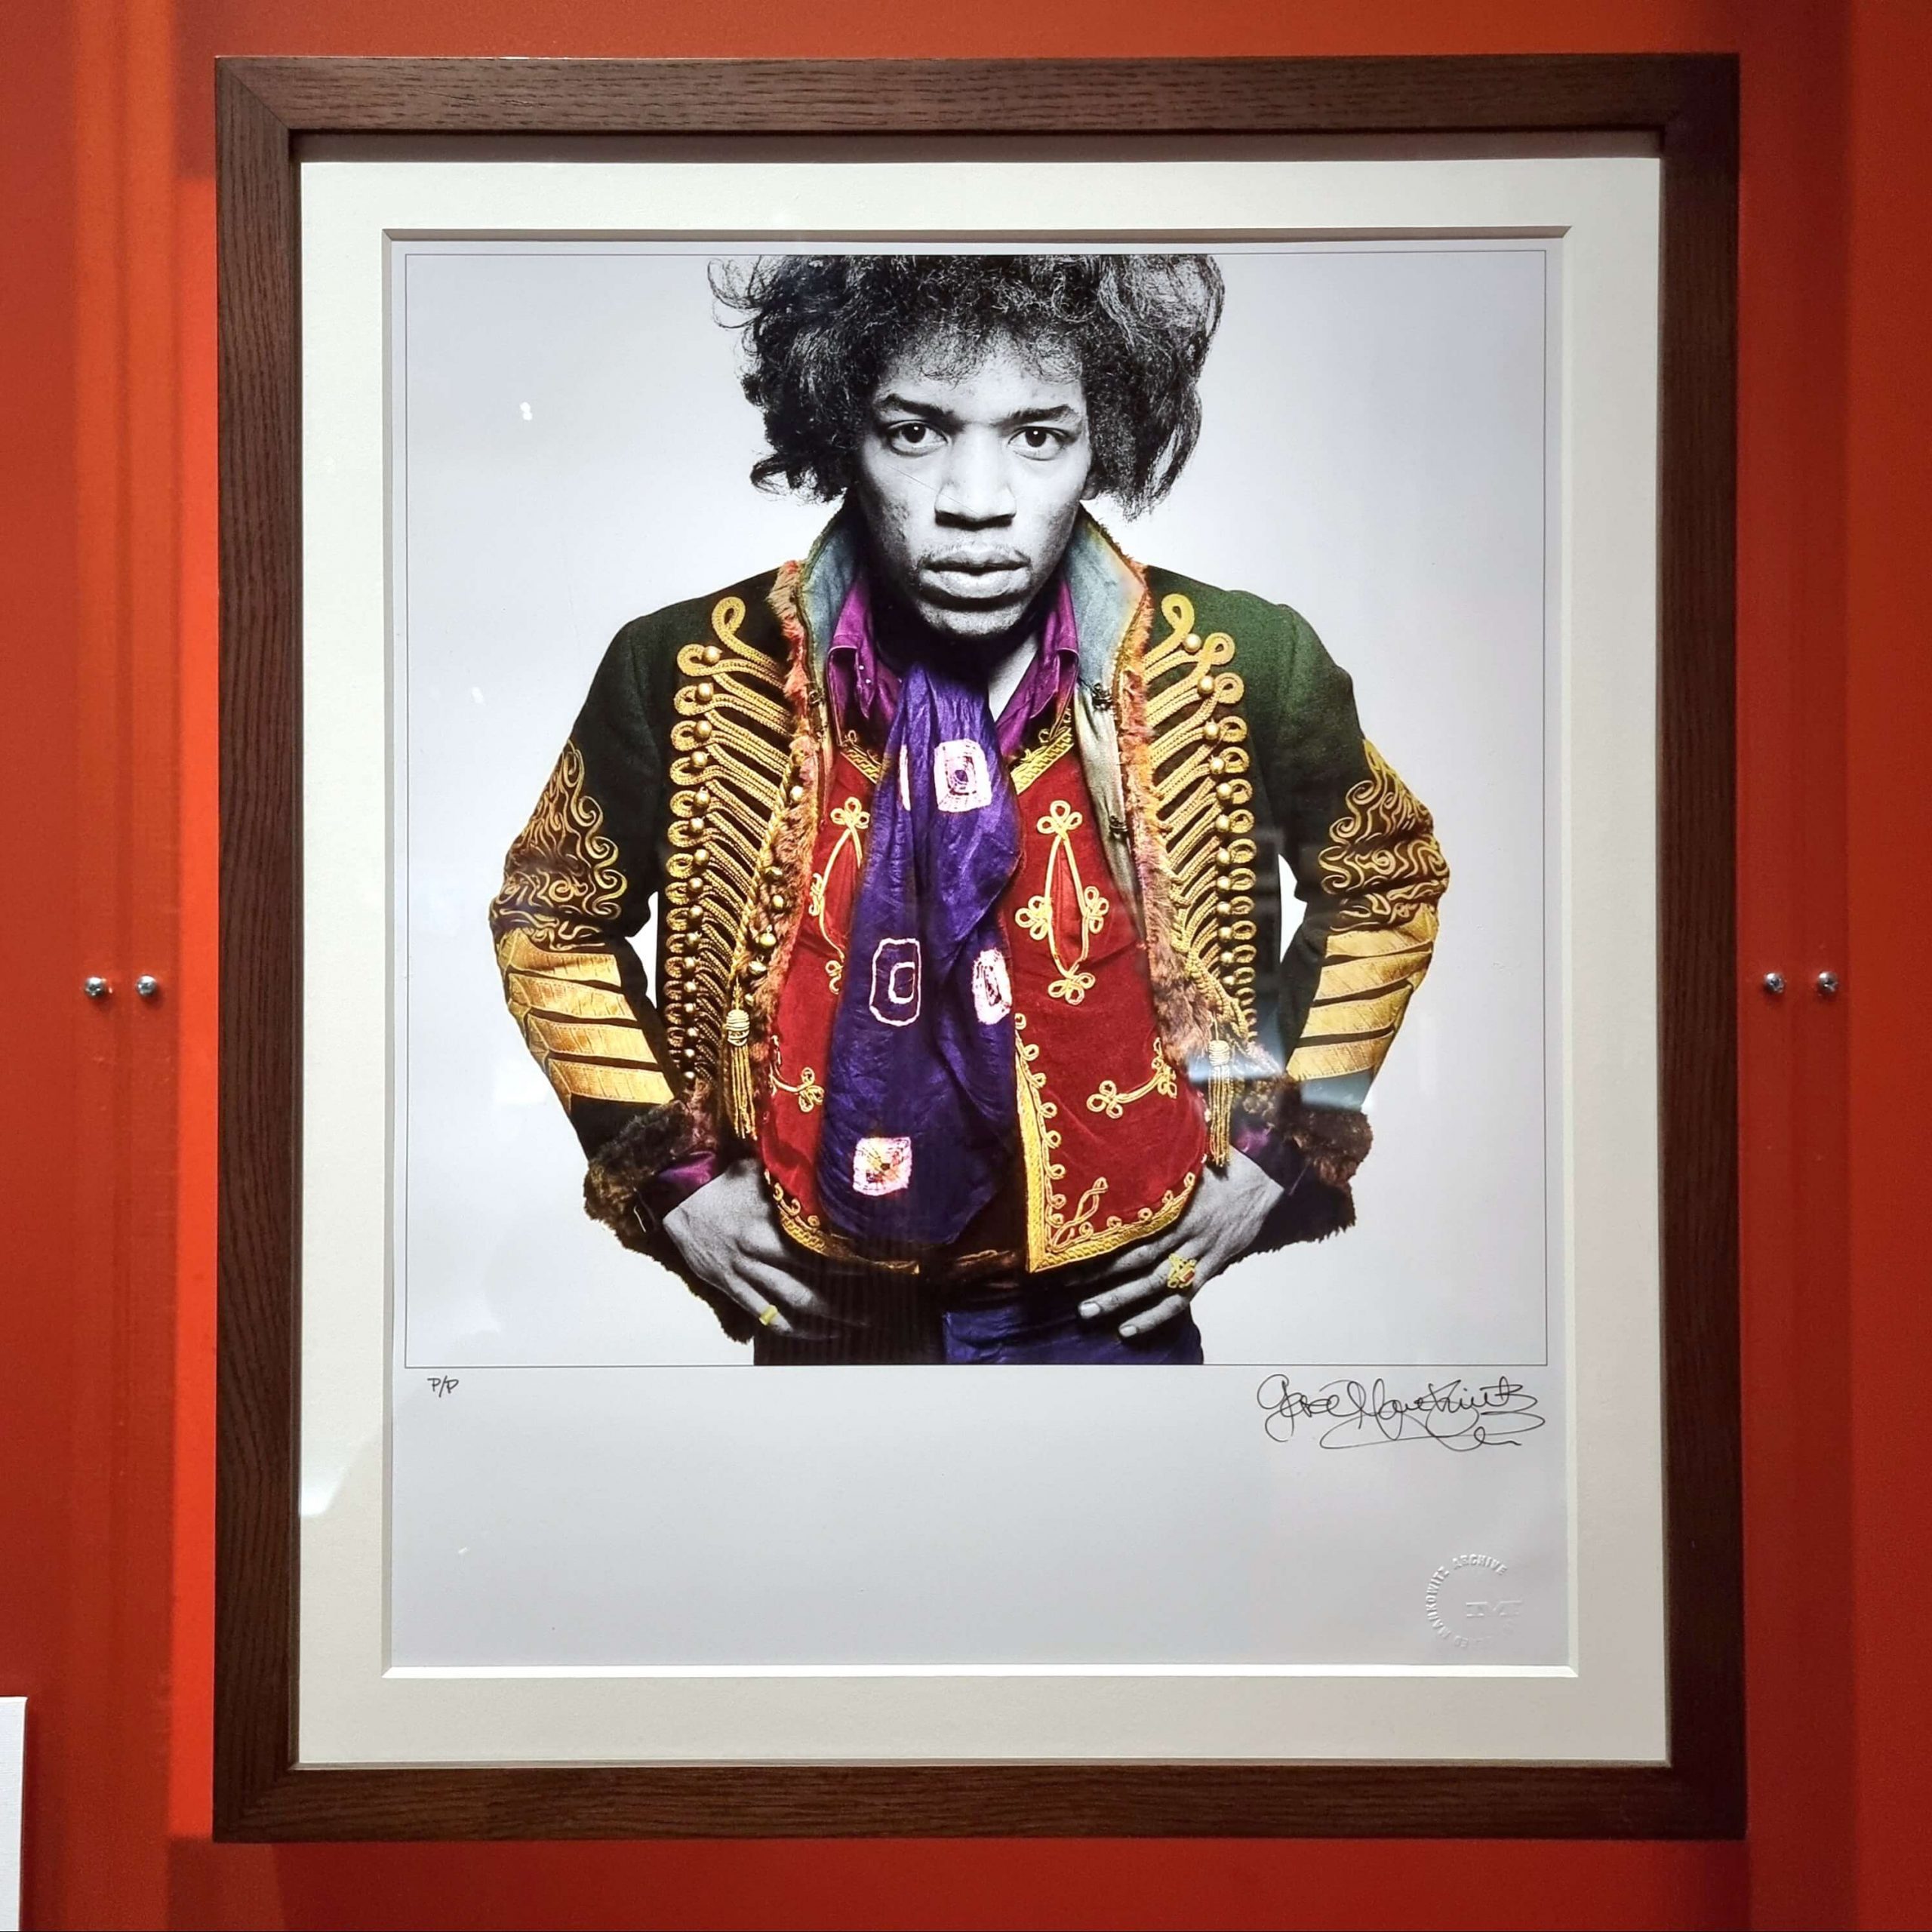 "Fashioning Masculinities. The Art of Menswear" at the V&A Museum, London / Jimi Hendrix / Gered Mankowitz / 1967 / Exhibition View / 2022